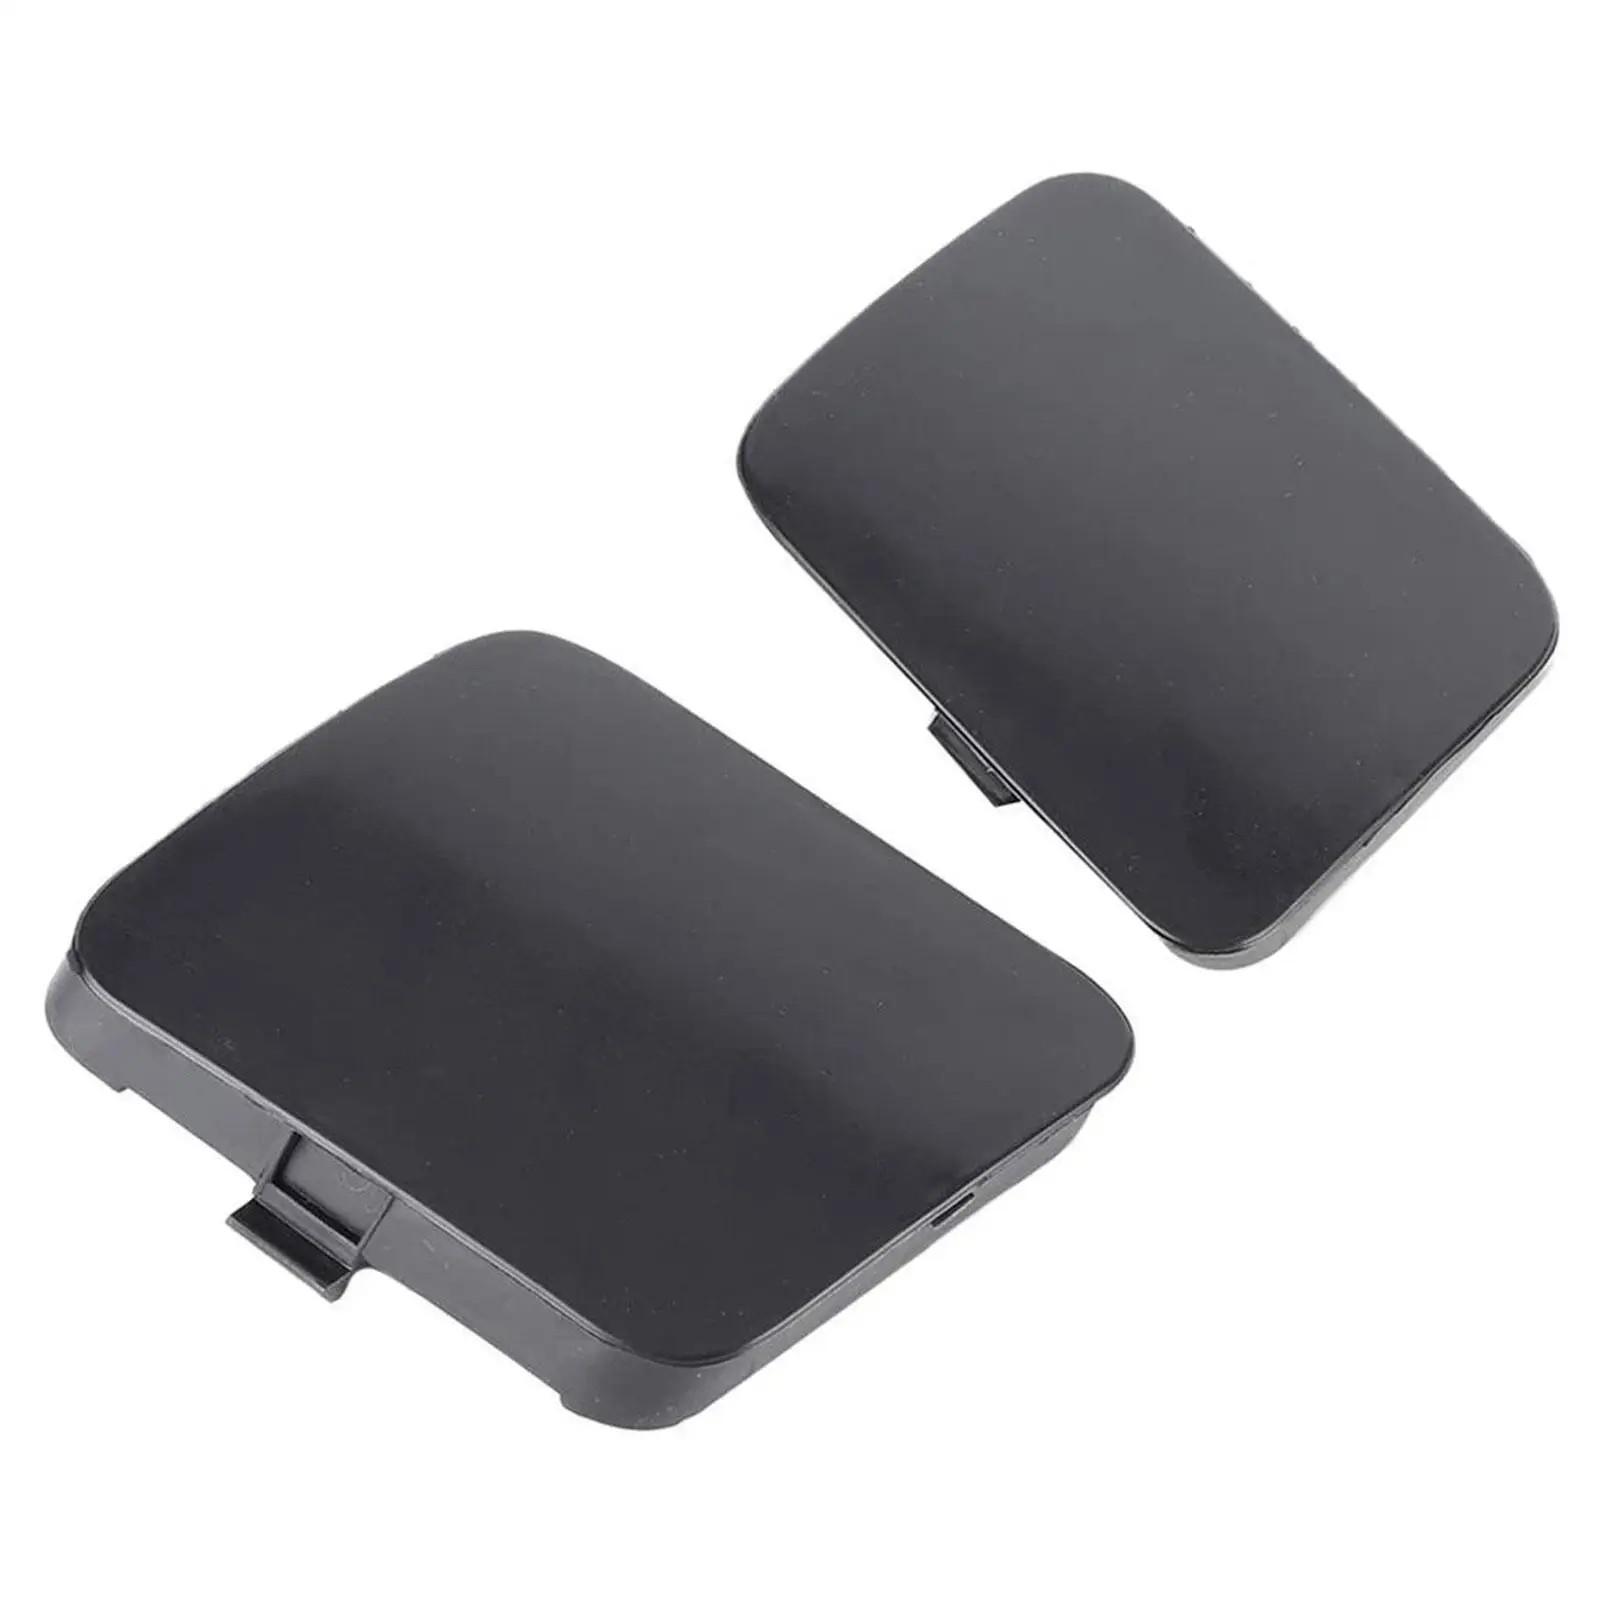 2x Front Tow Hook Cover Cap, Portable Parts Durable Replaces Easy to Install Professional Accessories Premium for XA30 06-08